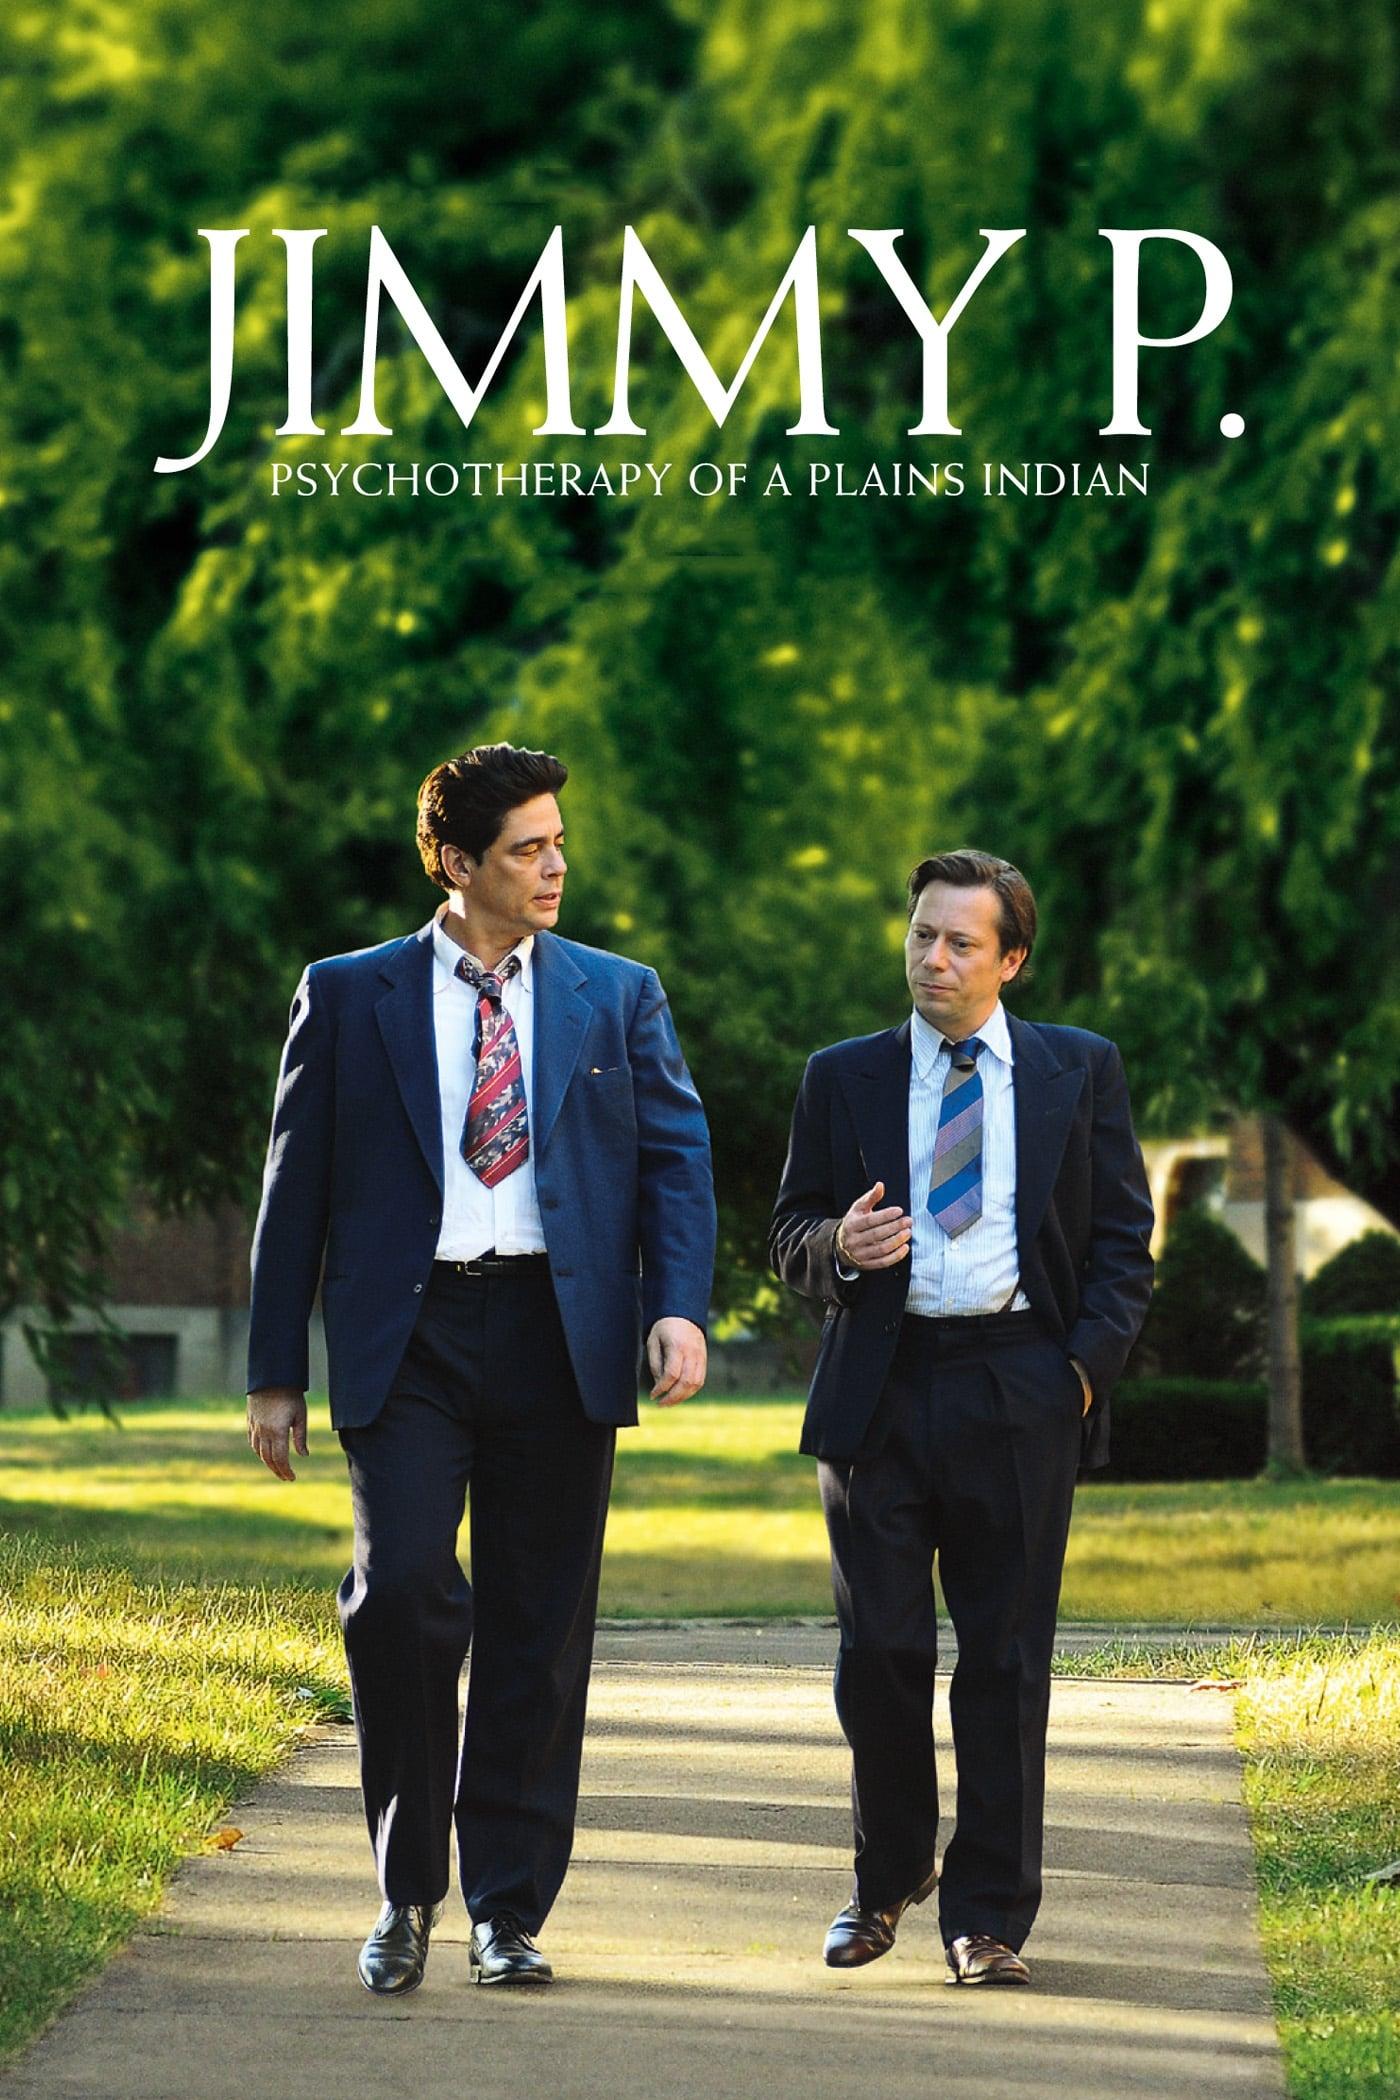 Jimmy P. poster